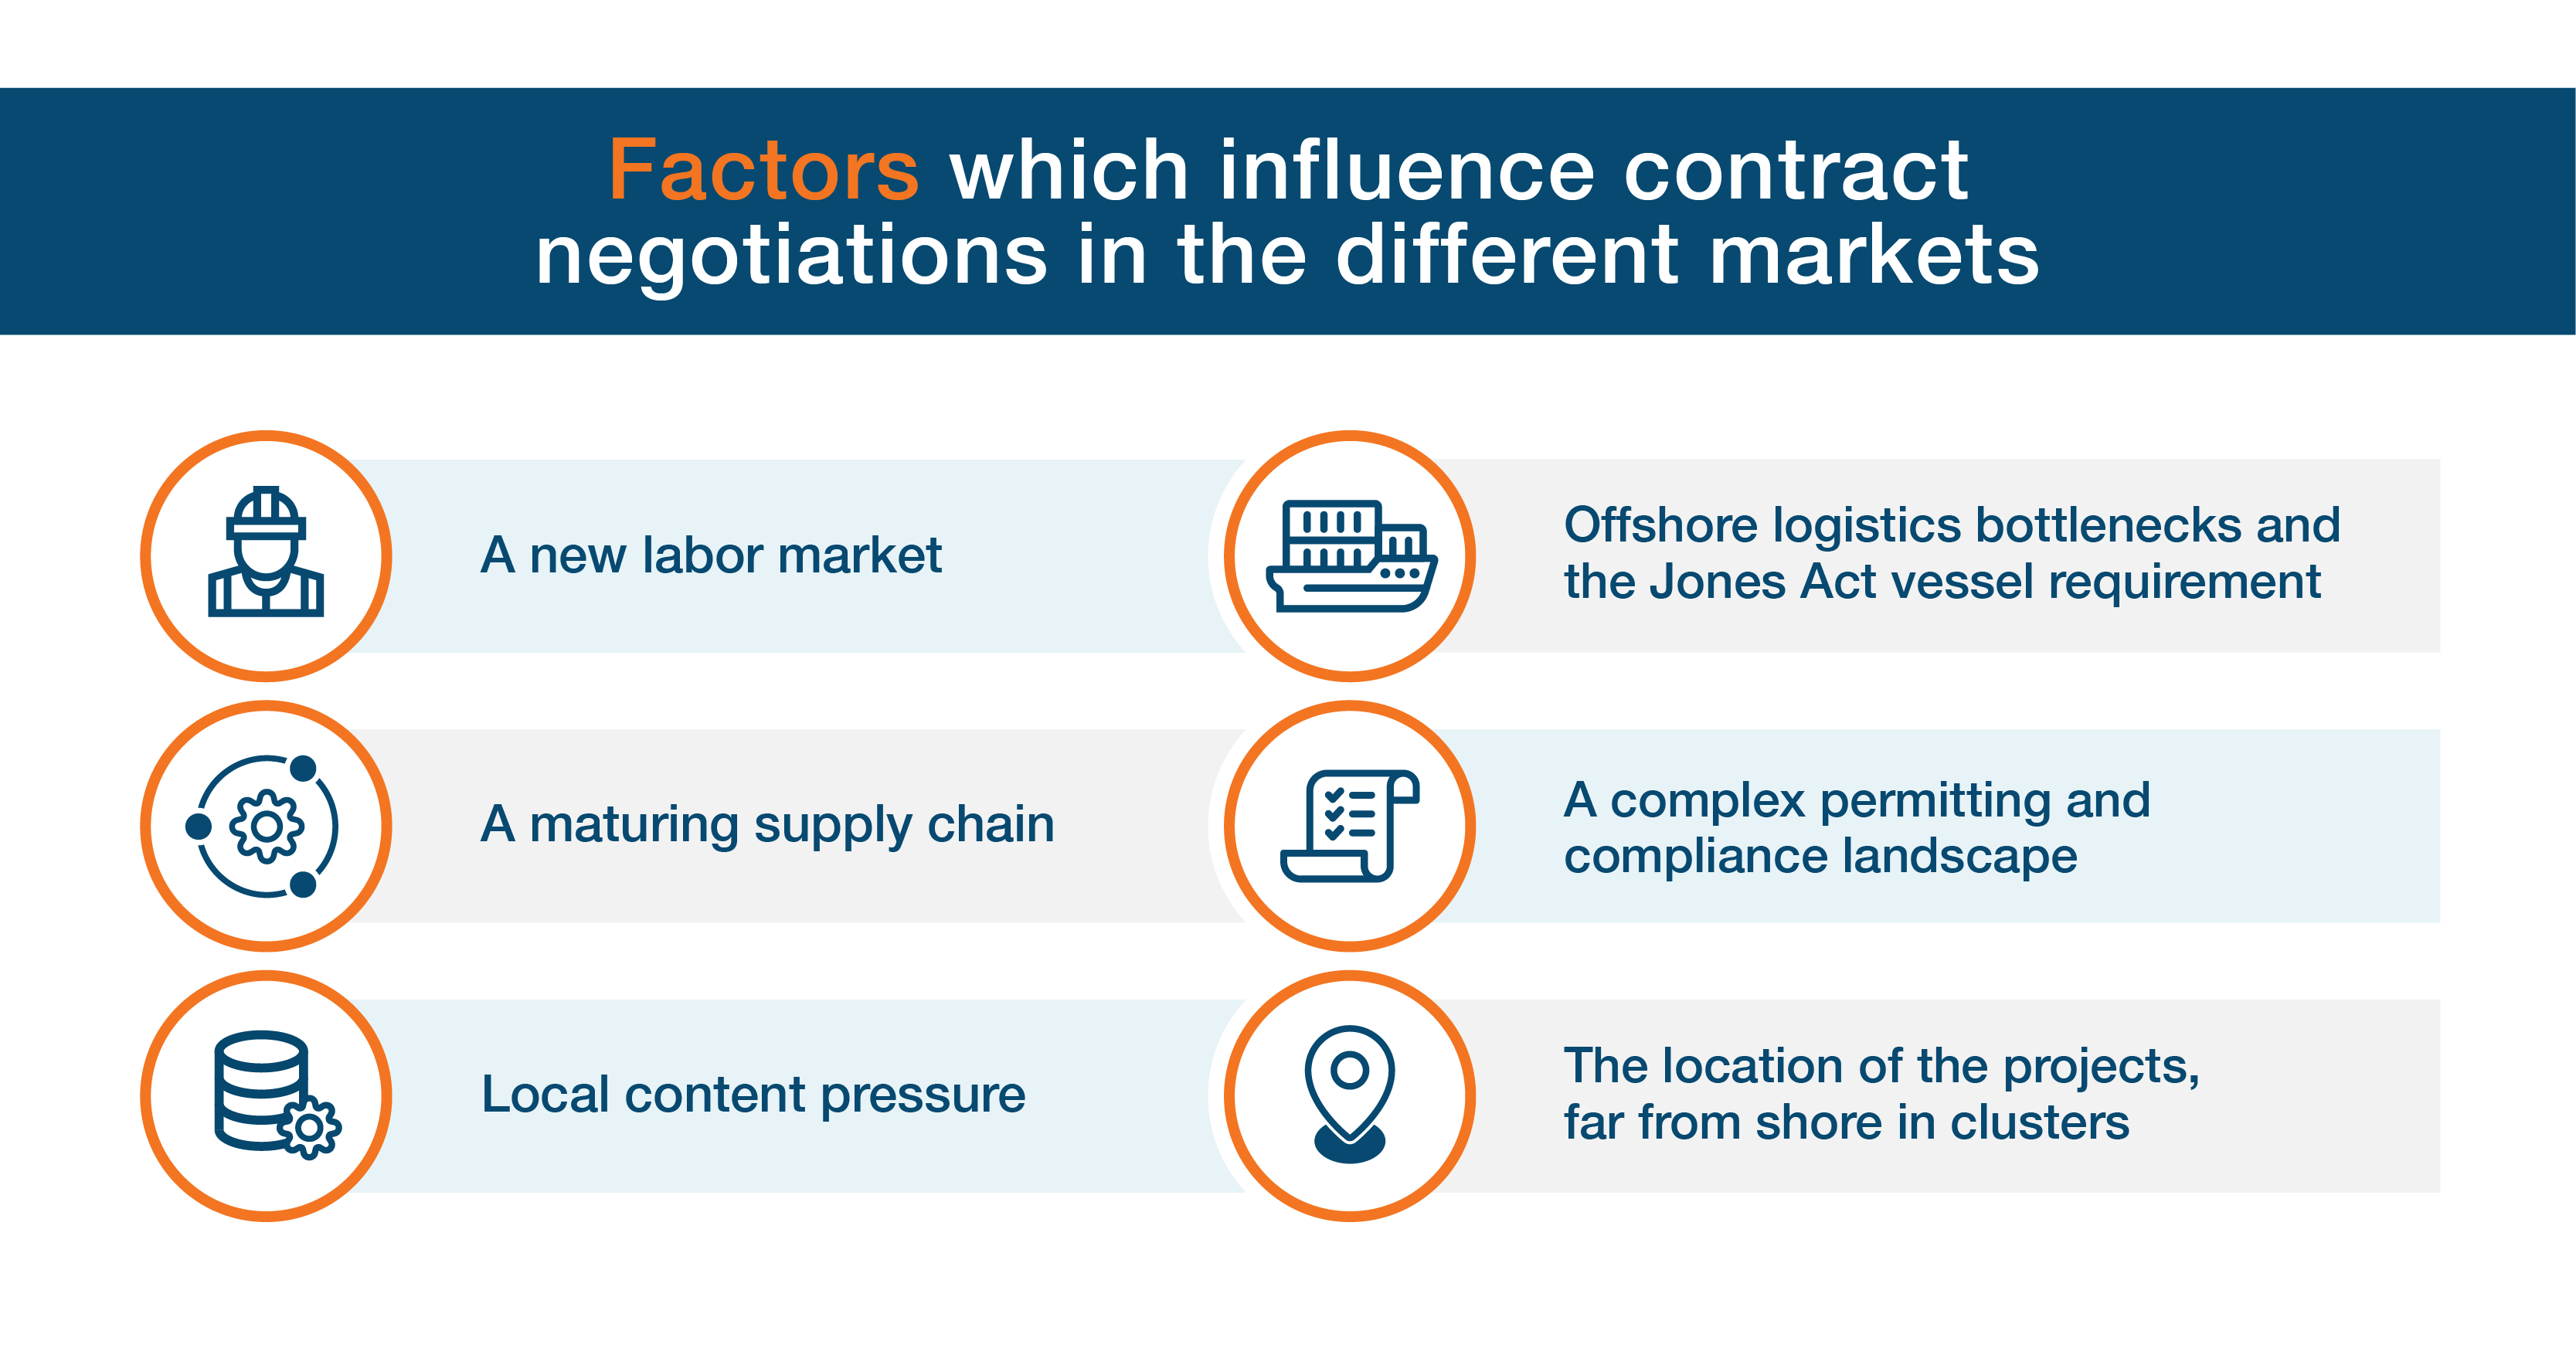 Which factors influence contract negotiations in the US?